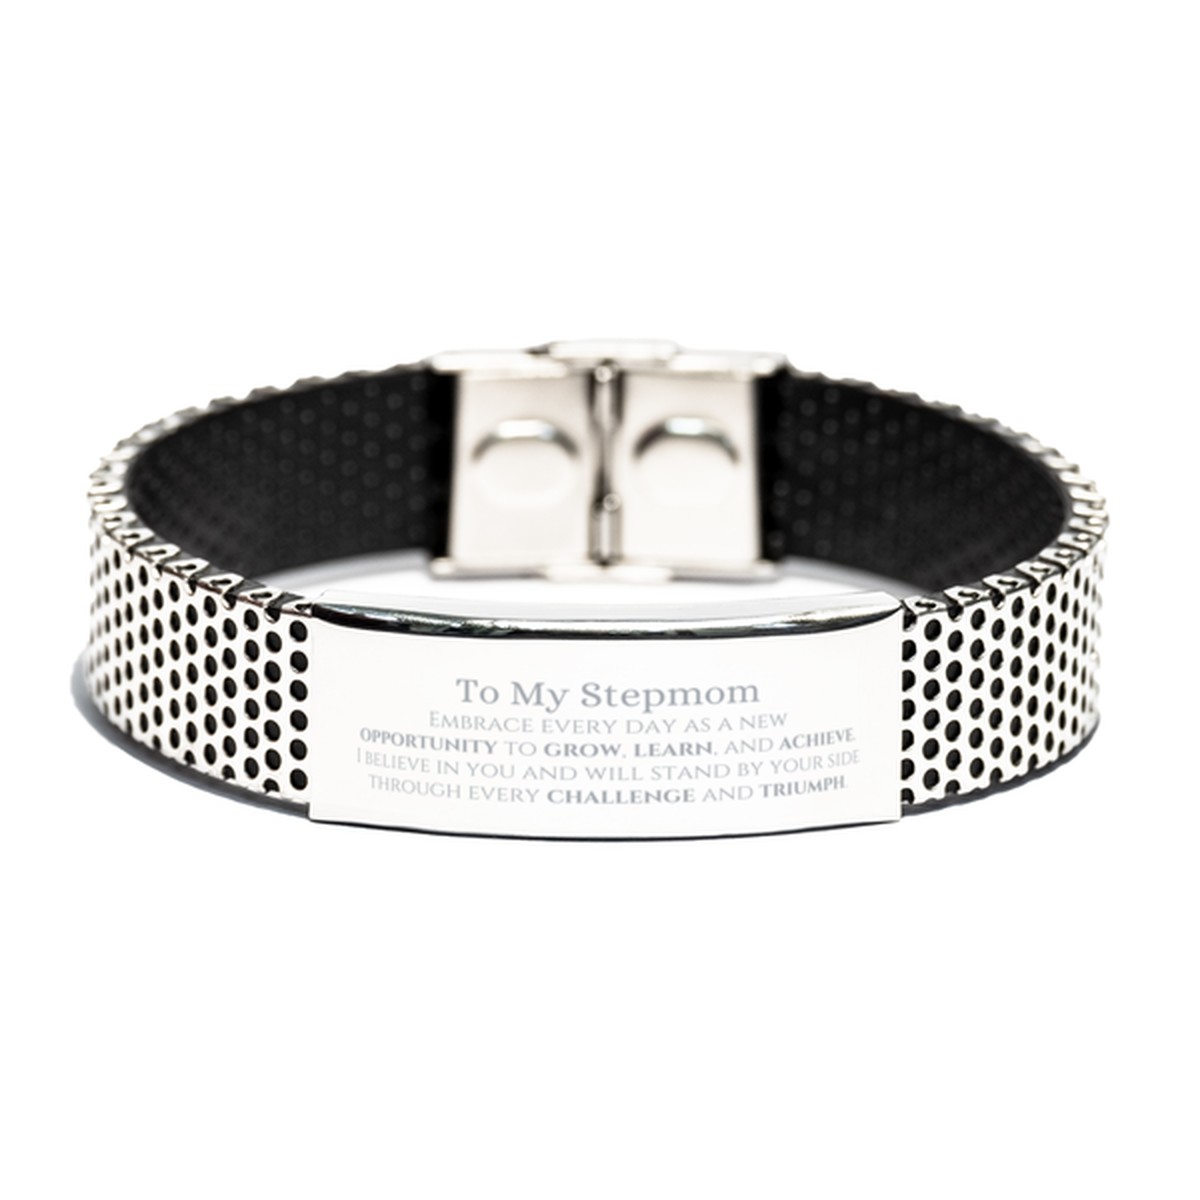 To My Stepmom Gifts, I believe in you and will stand by your side, Inspirational Stainless Steel Bracelet For Stepmom, Birthday Christmas Motivational Stepmom Gifts